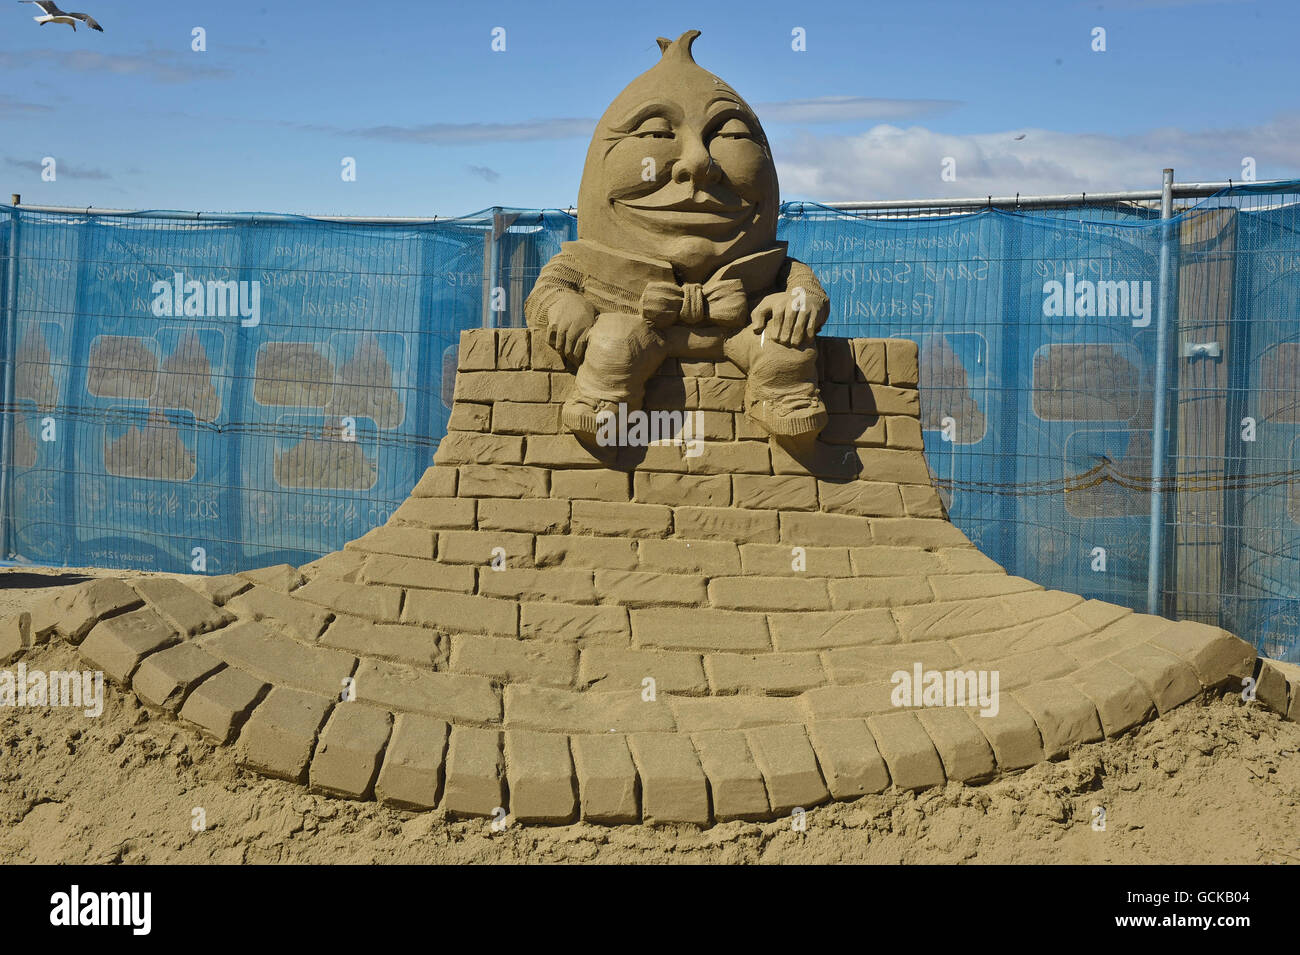 A sculpture of nursery rhyme character Humpty Dumpty in the Weston ...